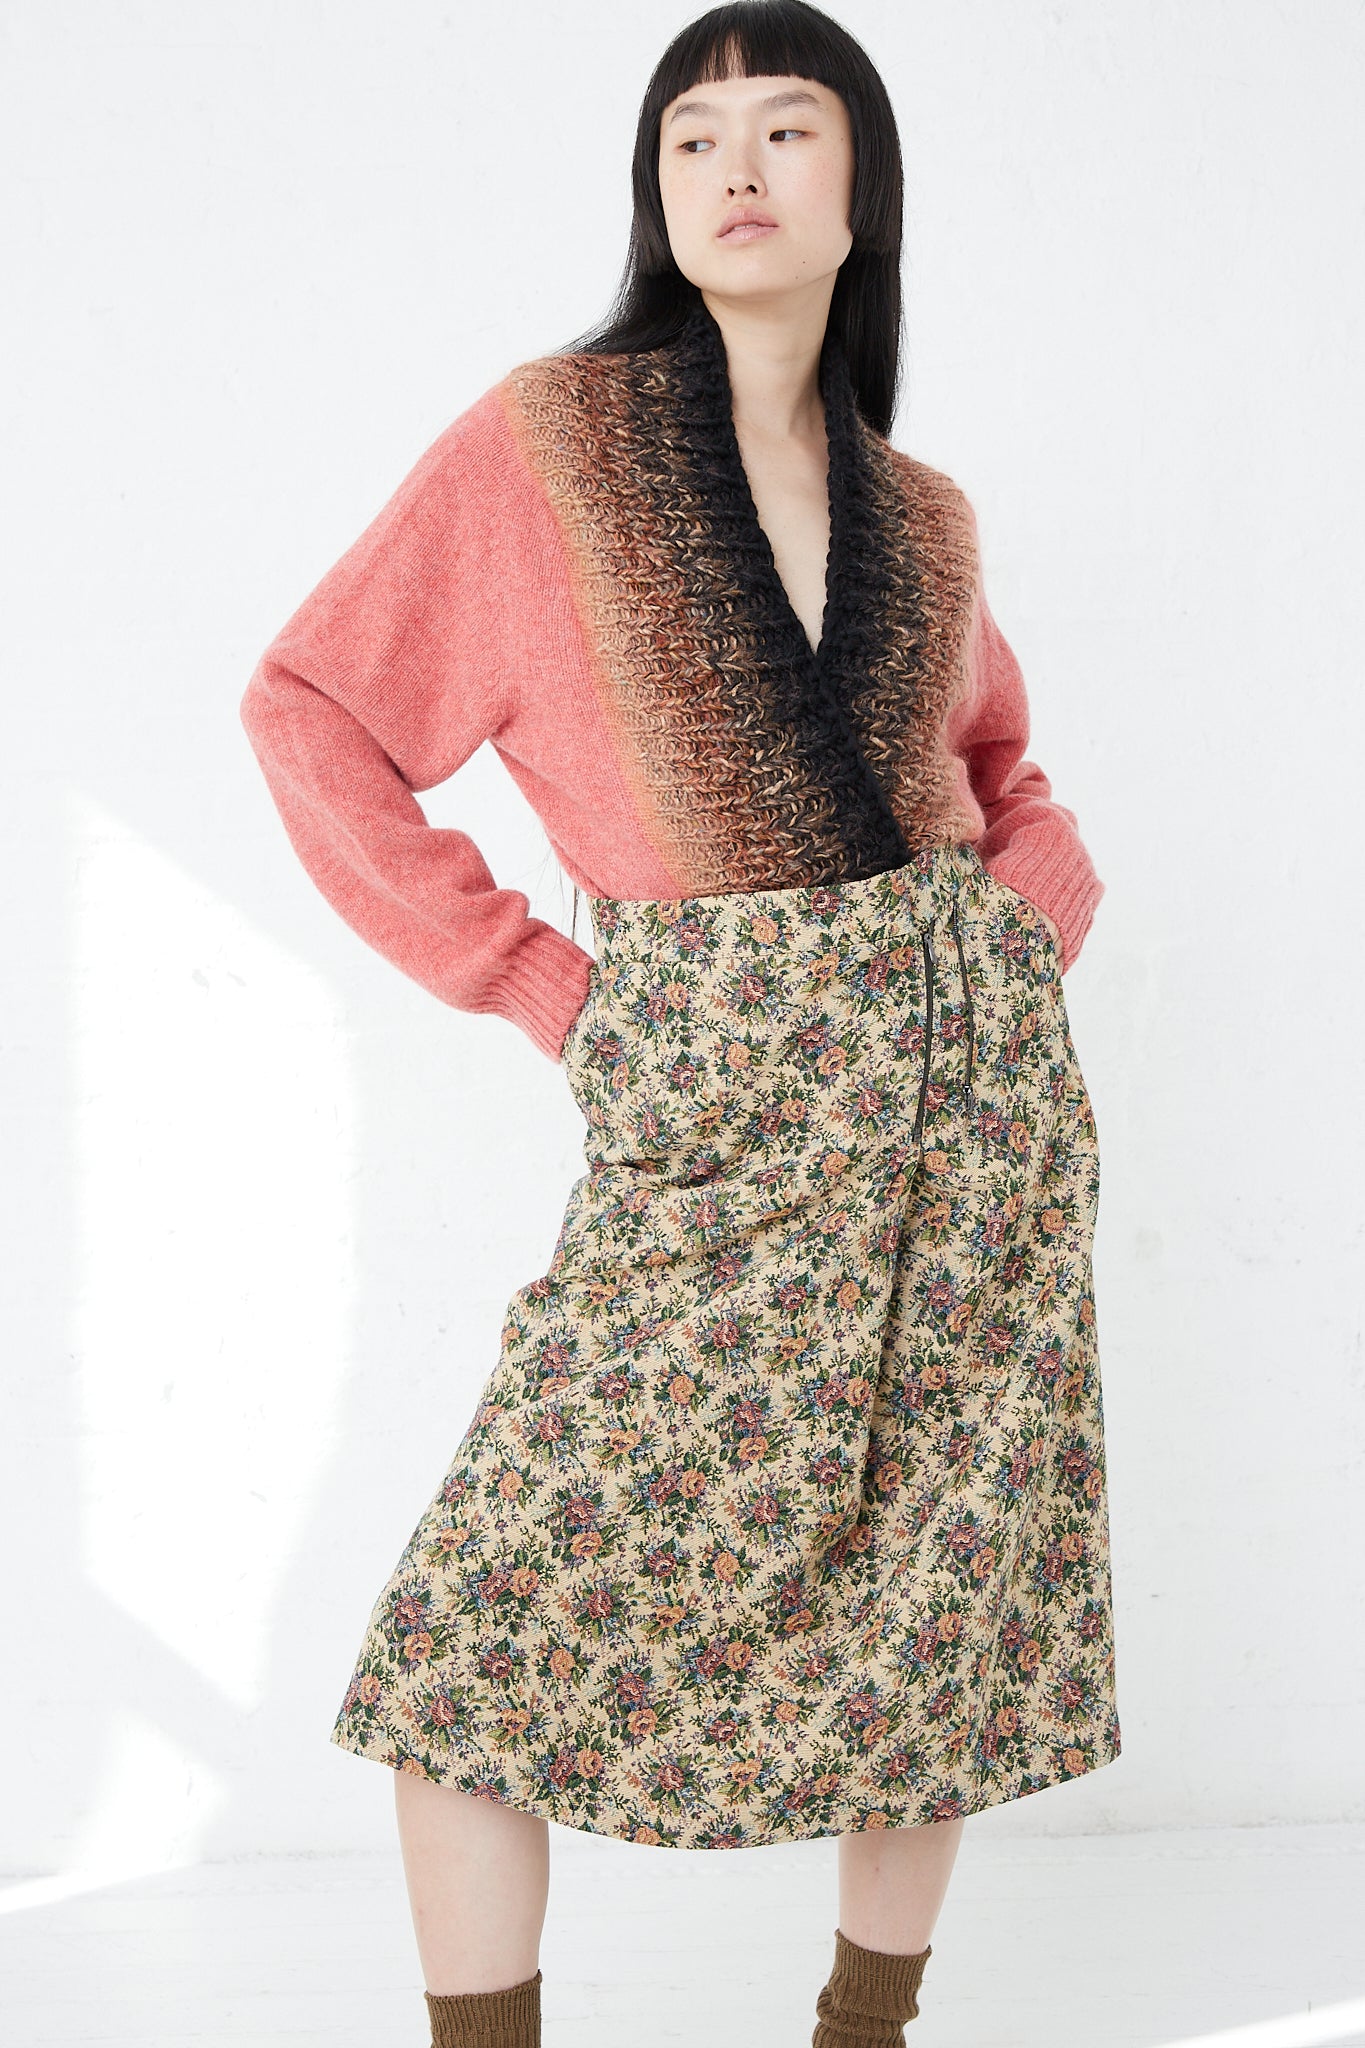 A woman wearing a SMLXL Skirt No. 75 in Flower from the luxury lifestyle brand Bless.